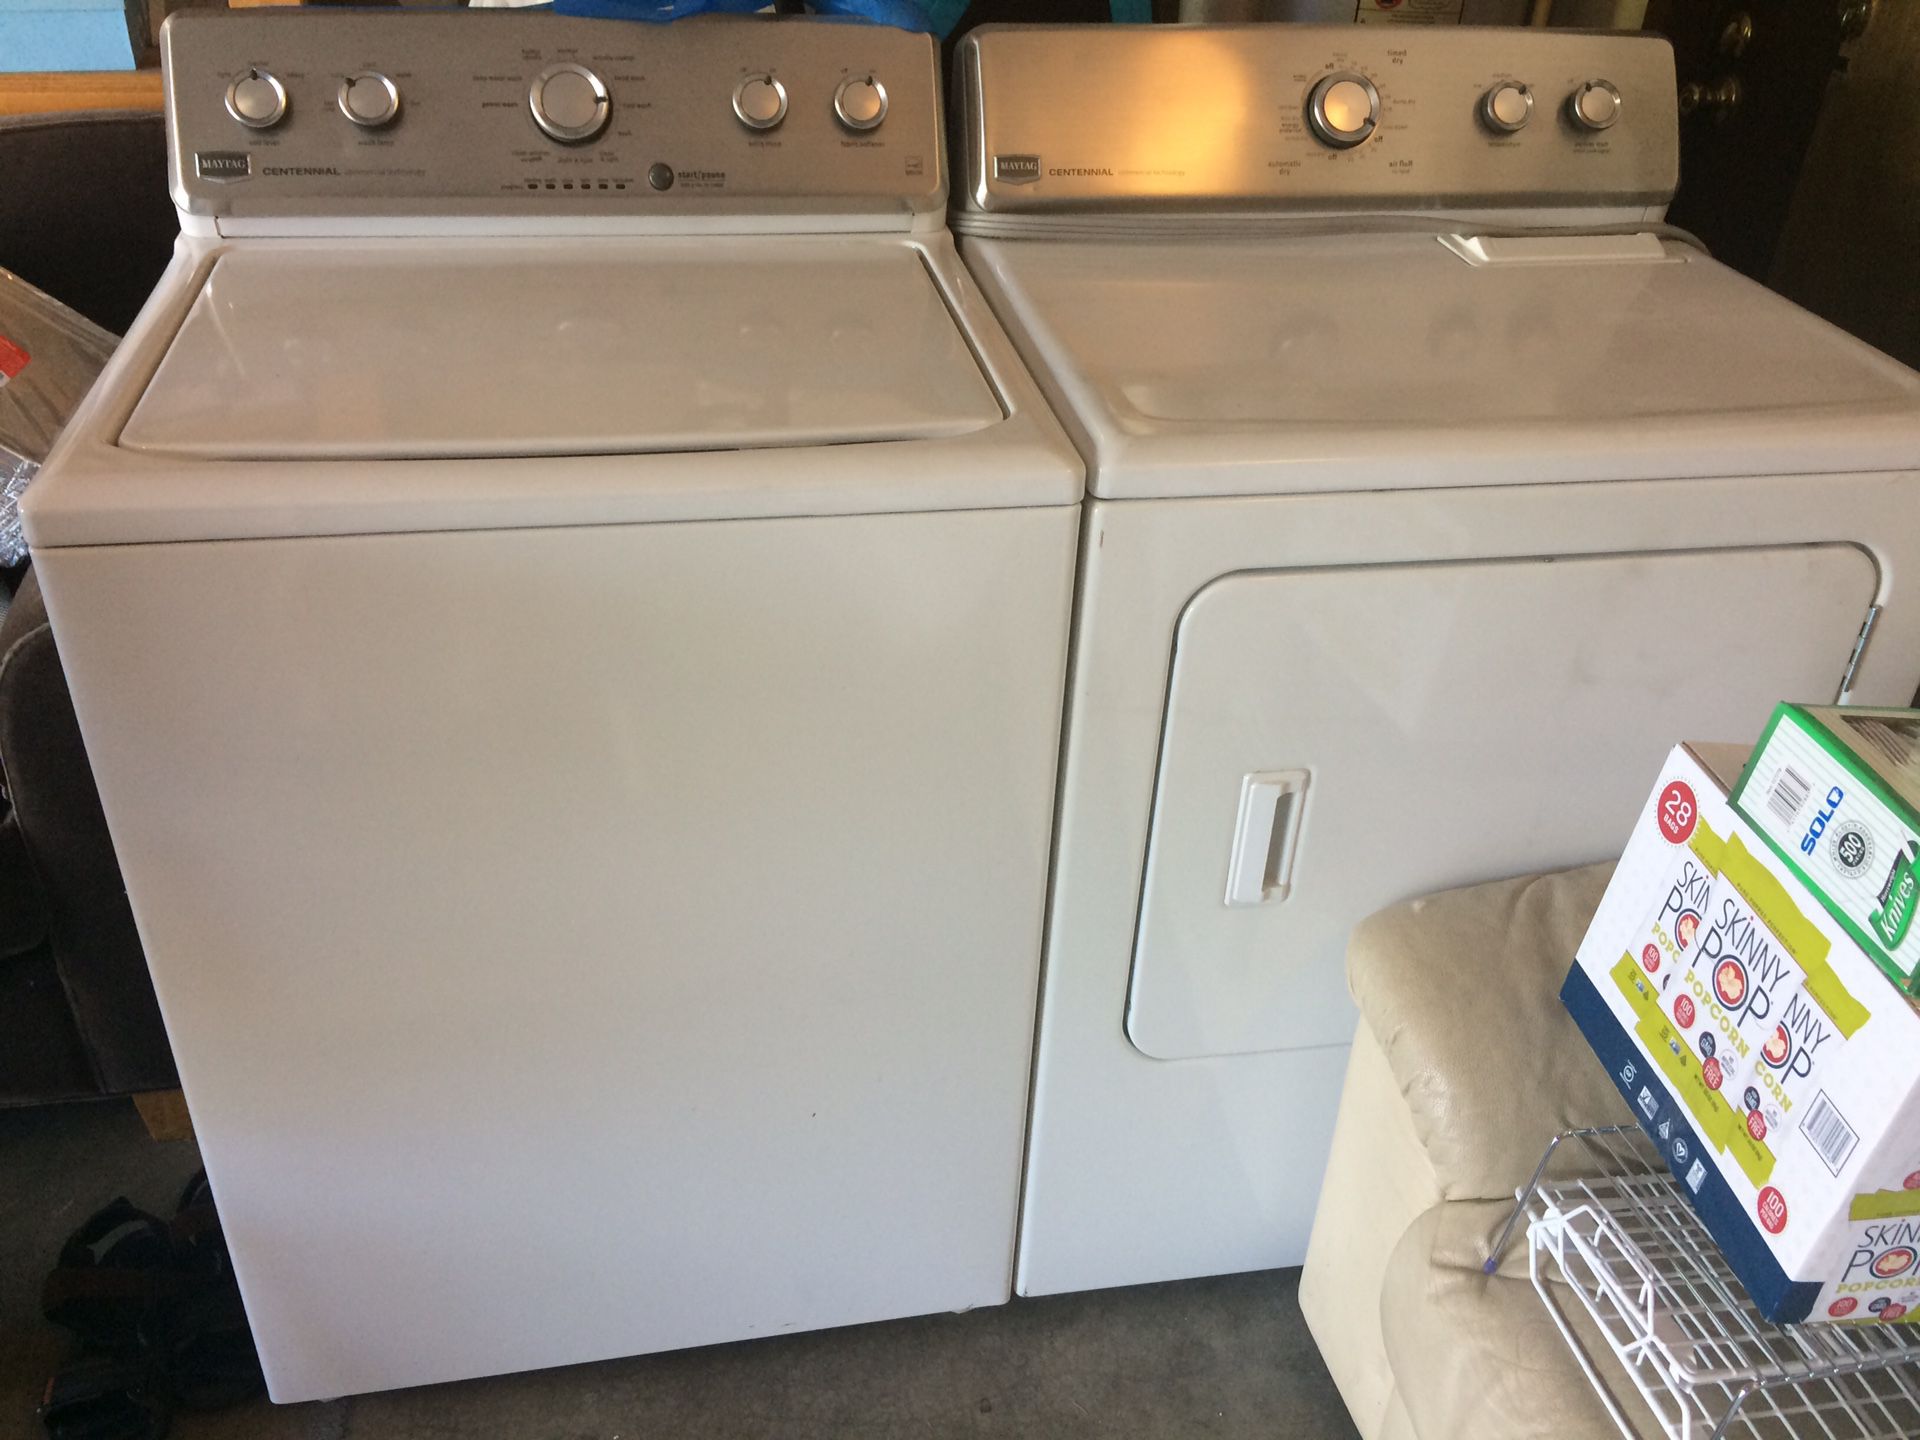 MAYTAG Centennial Commercial Technology Washer & Dryer PENDING